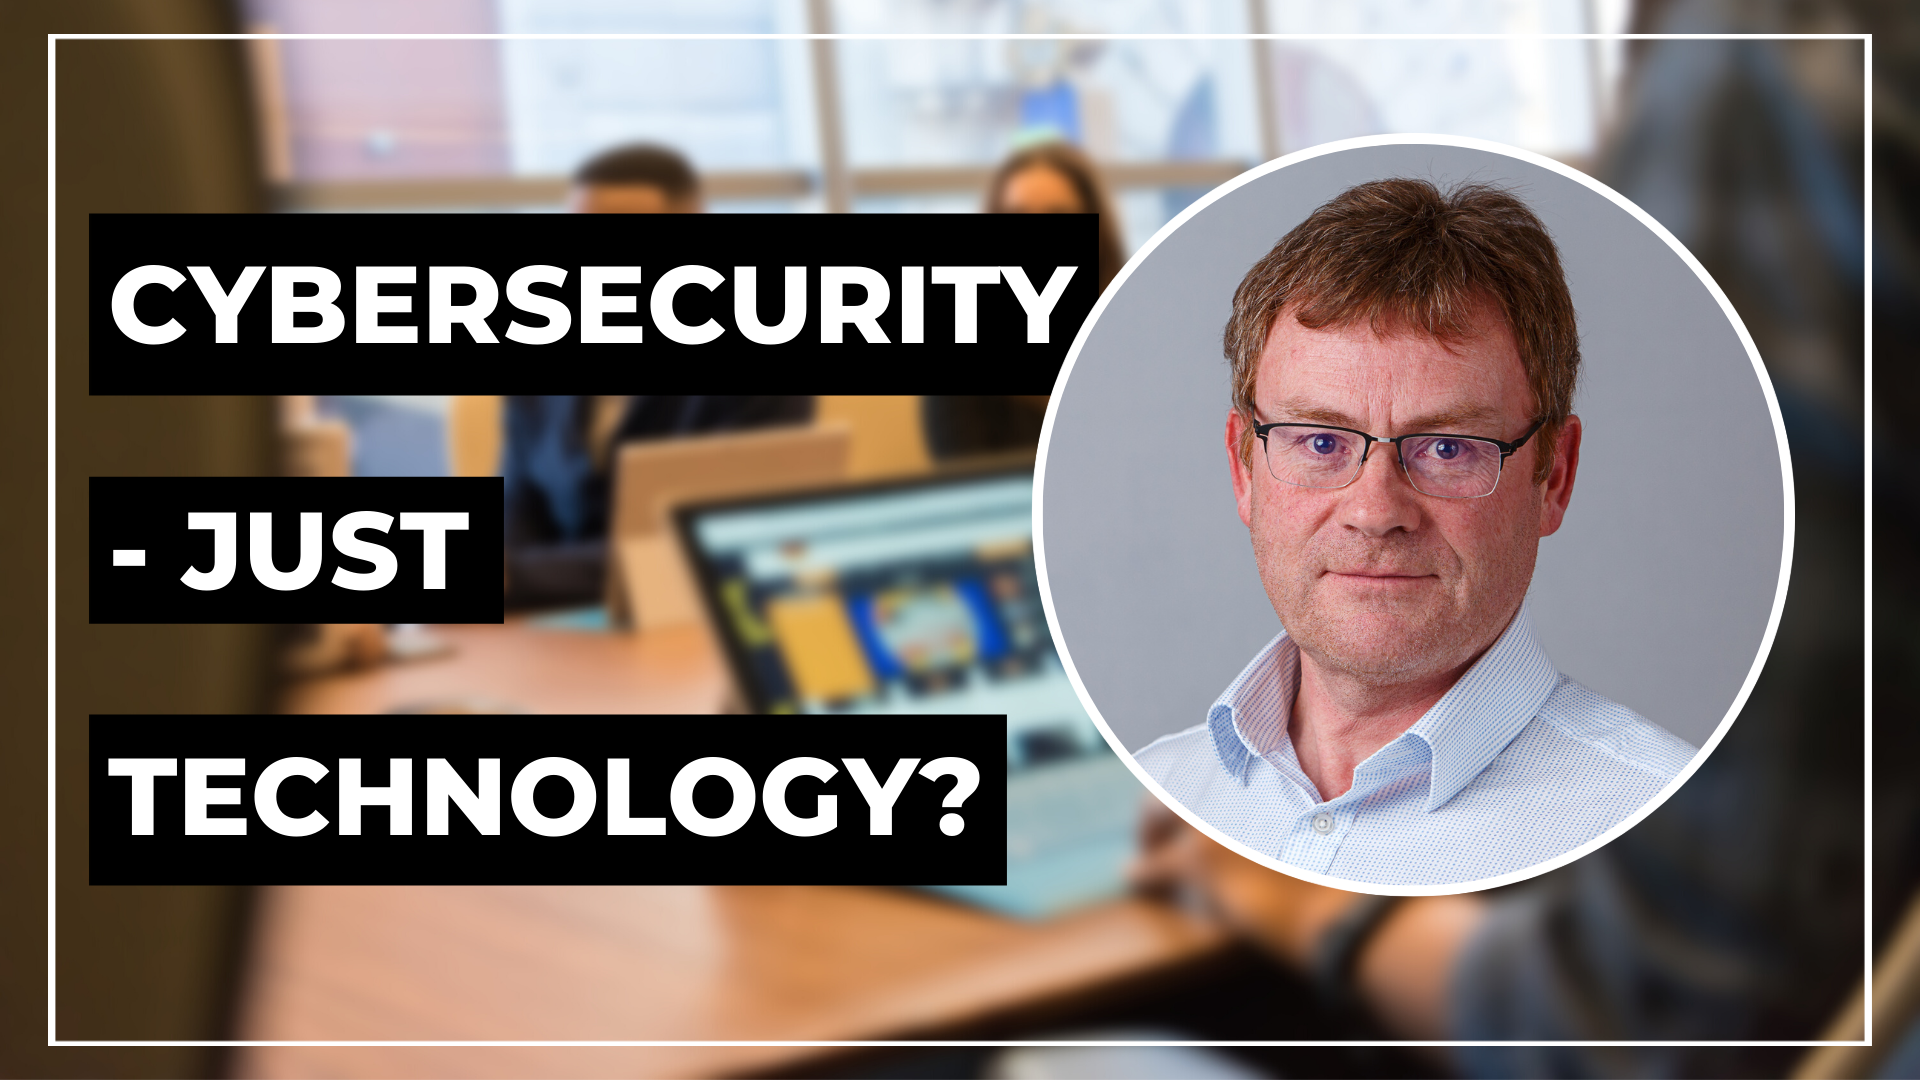 Cybersecurity is just a technology issue - 15 Dangerous Cybersecurity Myths - Day 4